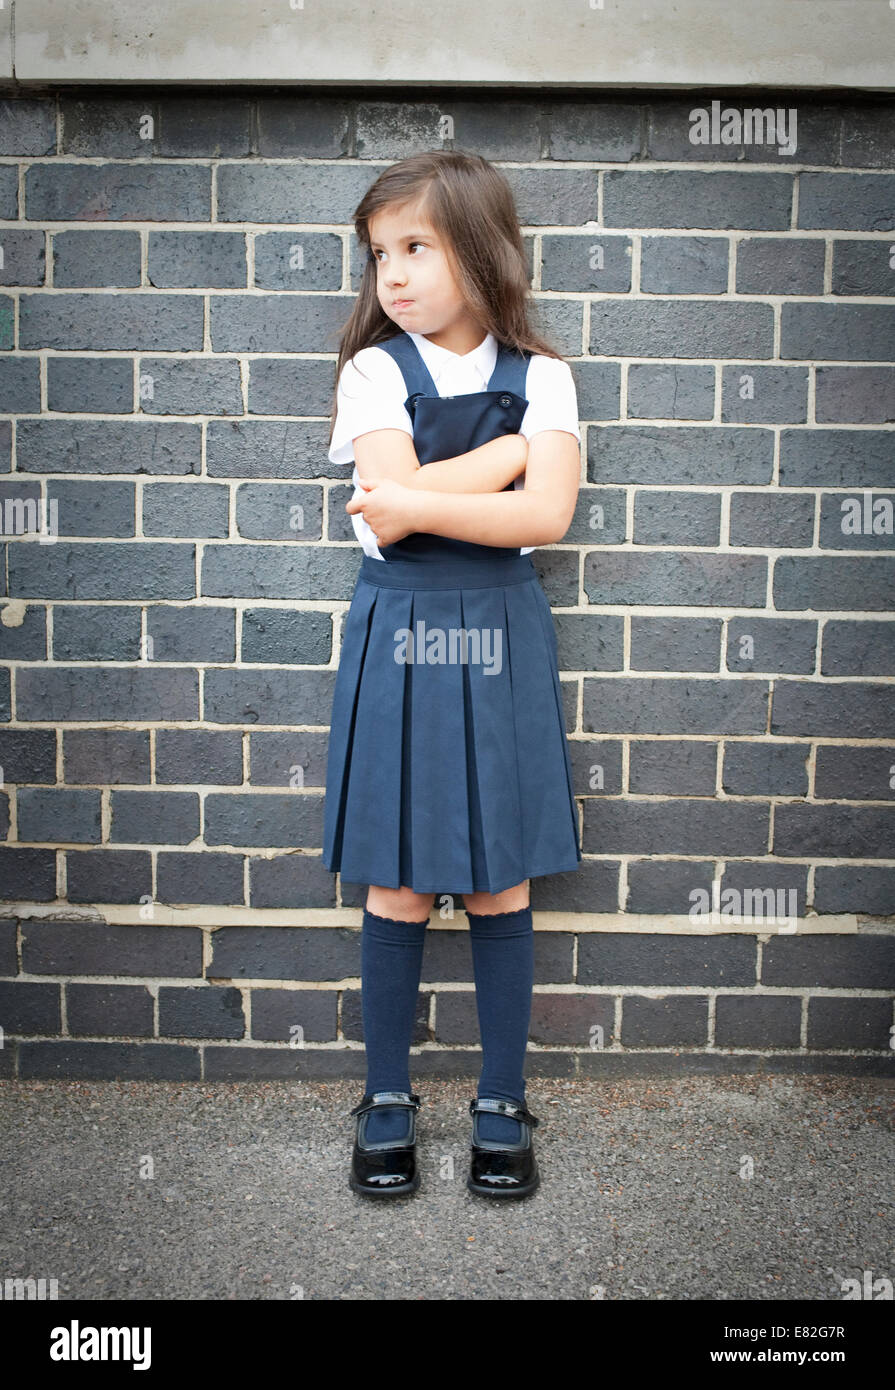 Portrait of girl in playground looking grumpy with arms folded Stock Photo